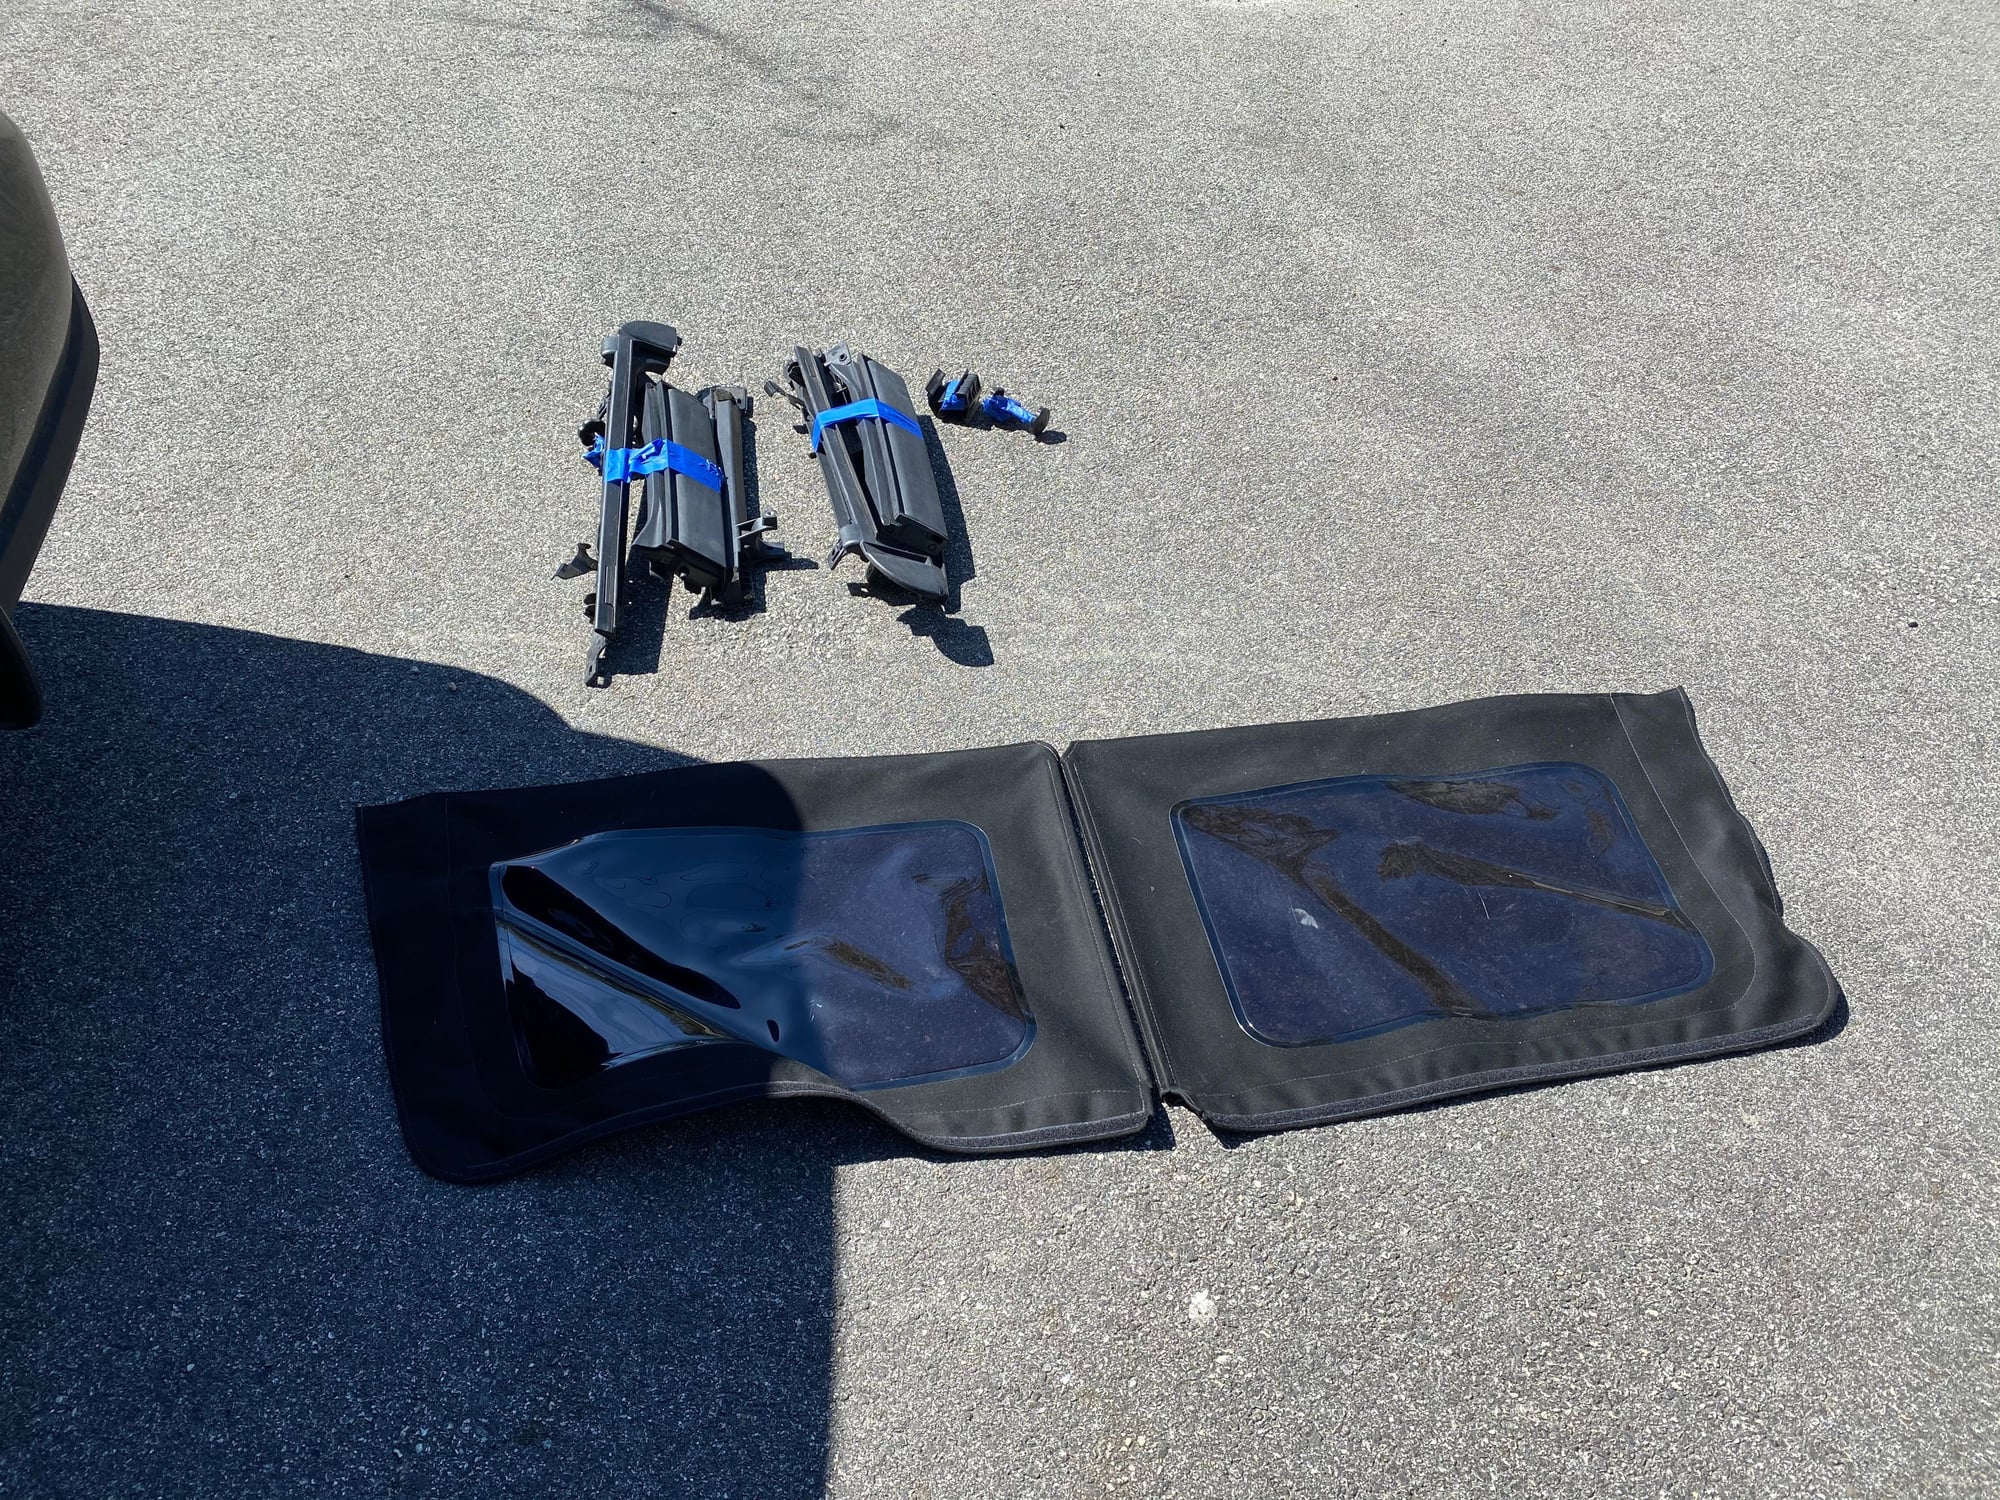 Exterior Body Parts - Soft top - Used - 2010 to 2018 Jeep Wrangler - Hackensack Or West Milford Area, NJ 07421, United States